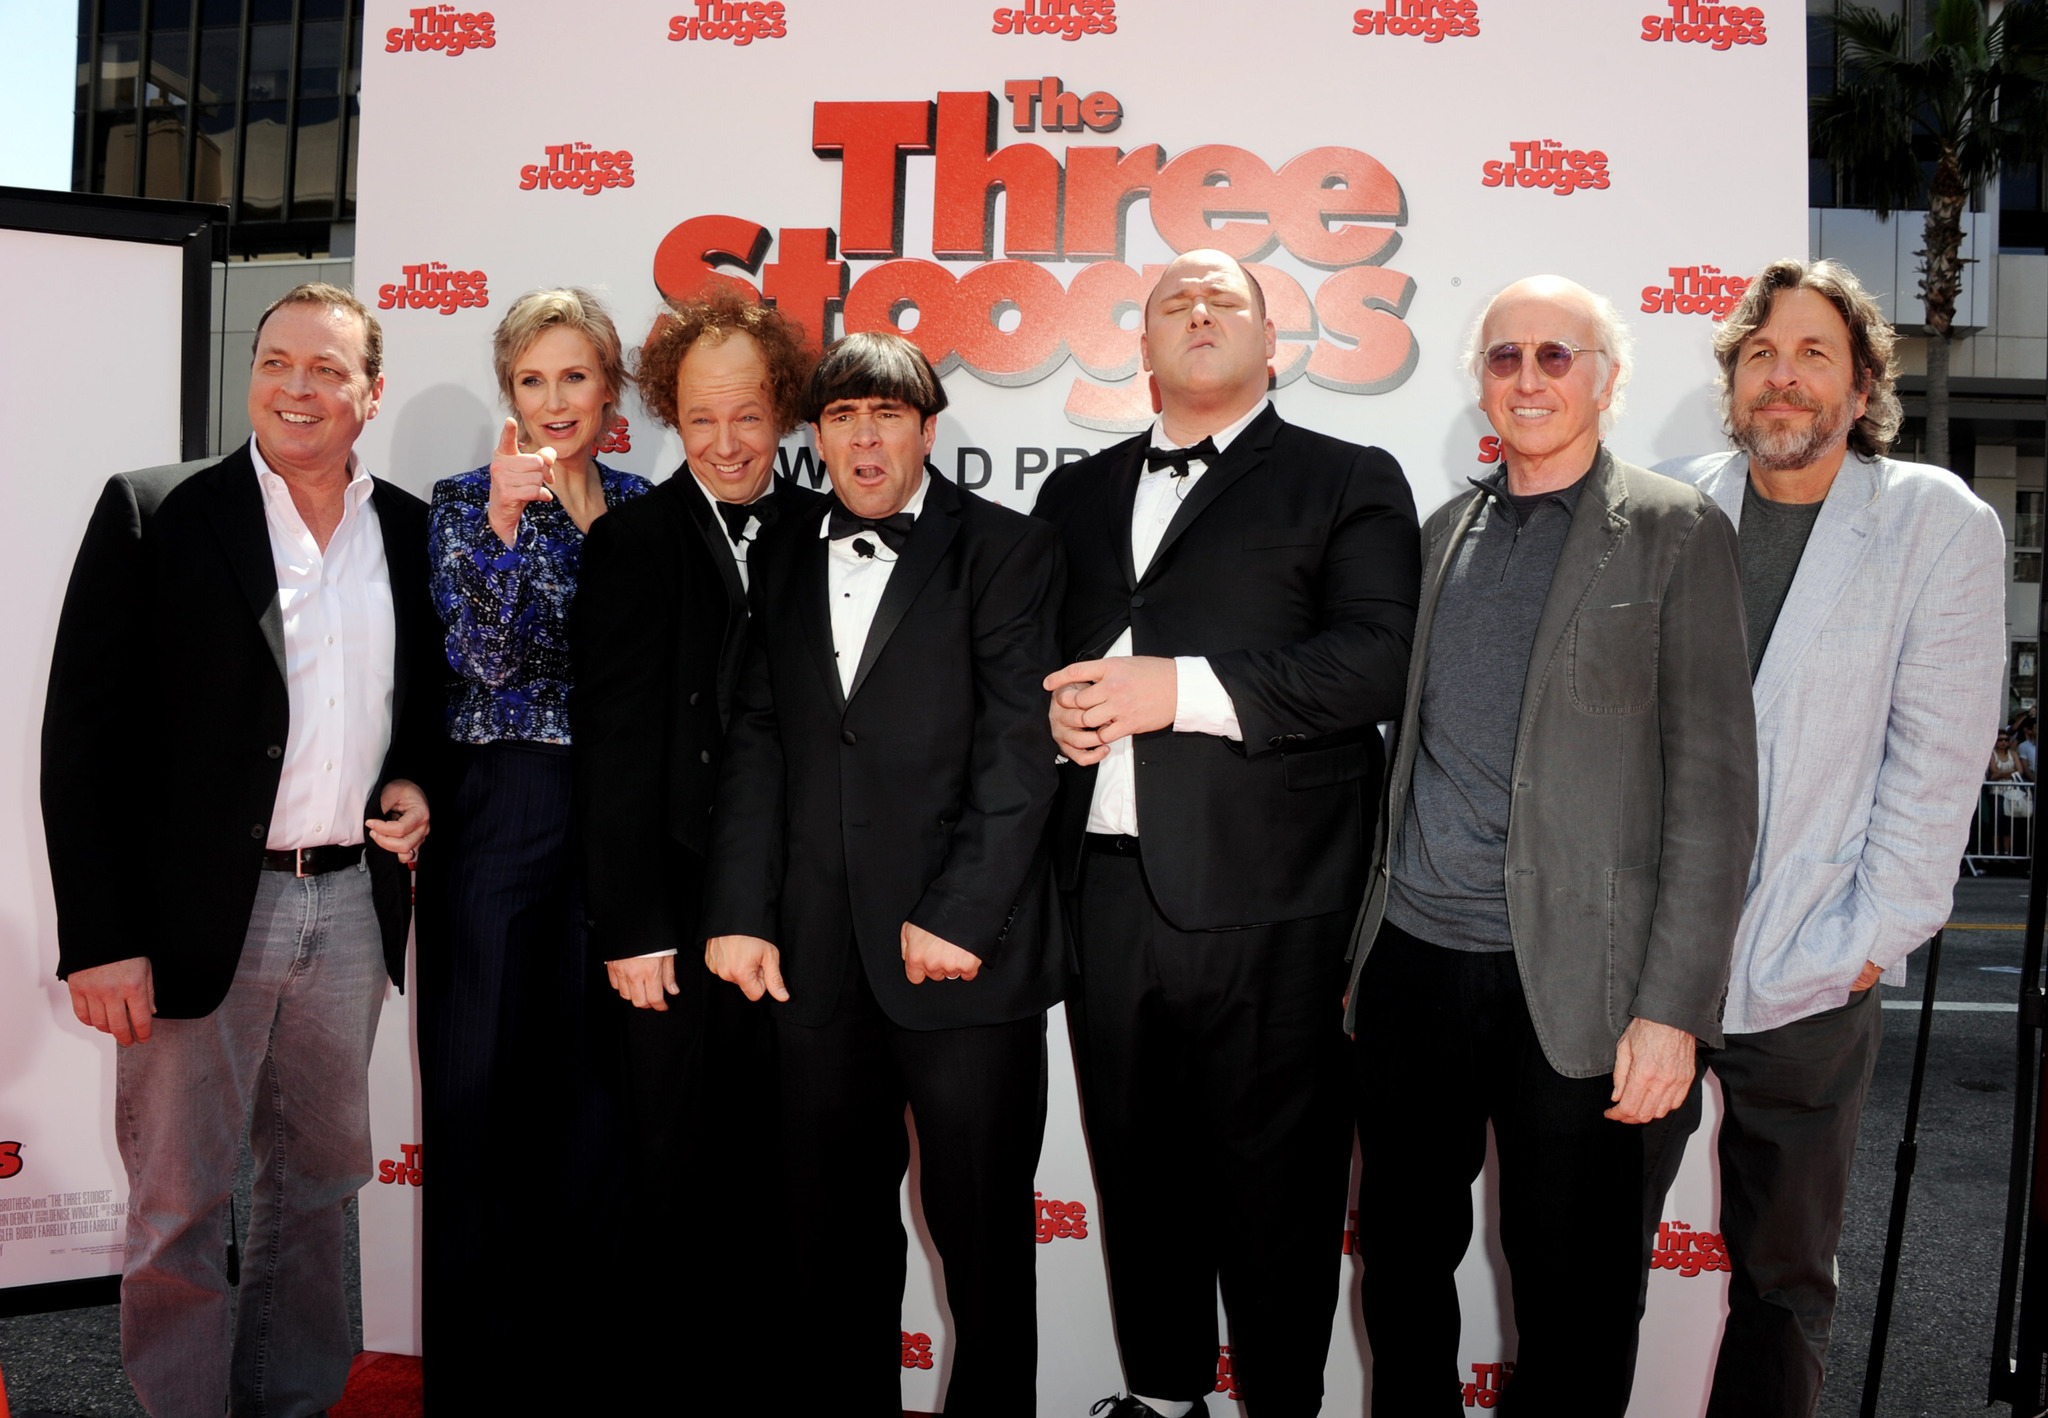 Sean Hayes, Larry David, Chris Diamantopoulos, Bobby Farrelly, Peter Farrelly, Jane Lynch and Will Sasso at event of Trys veplos (2012)